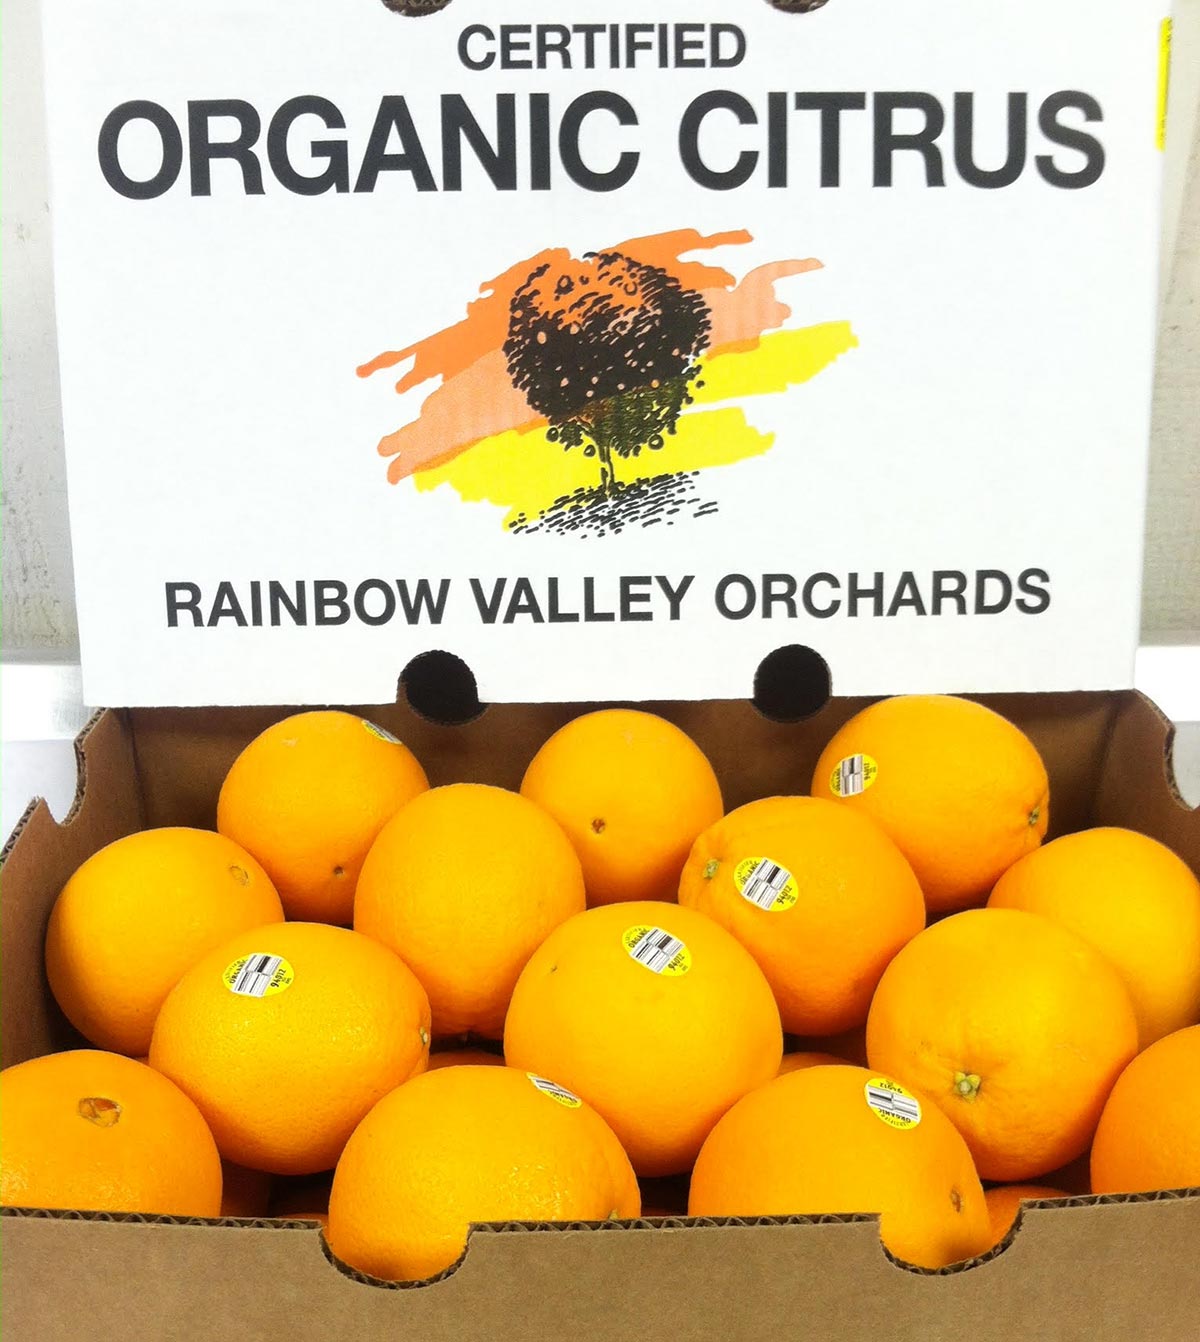 rainbow-valley-orchards-certified-organic-produce-citrus-packing